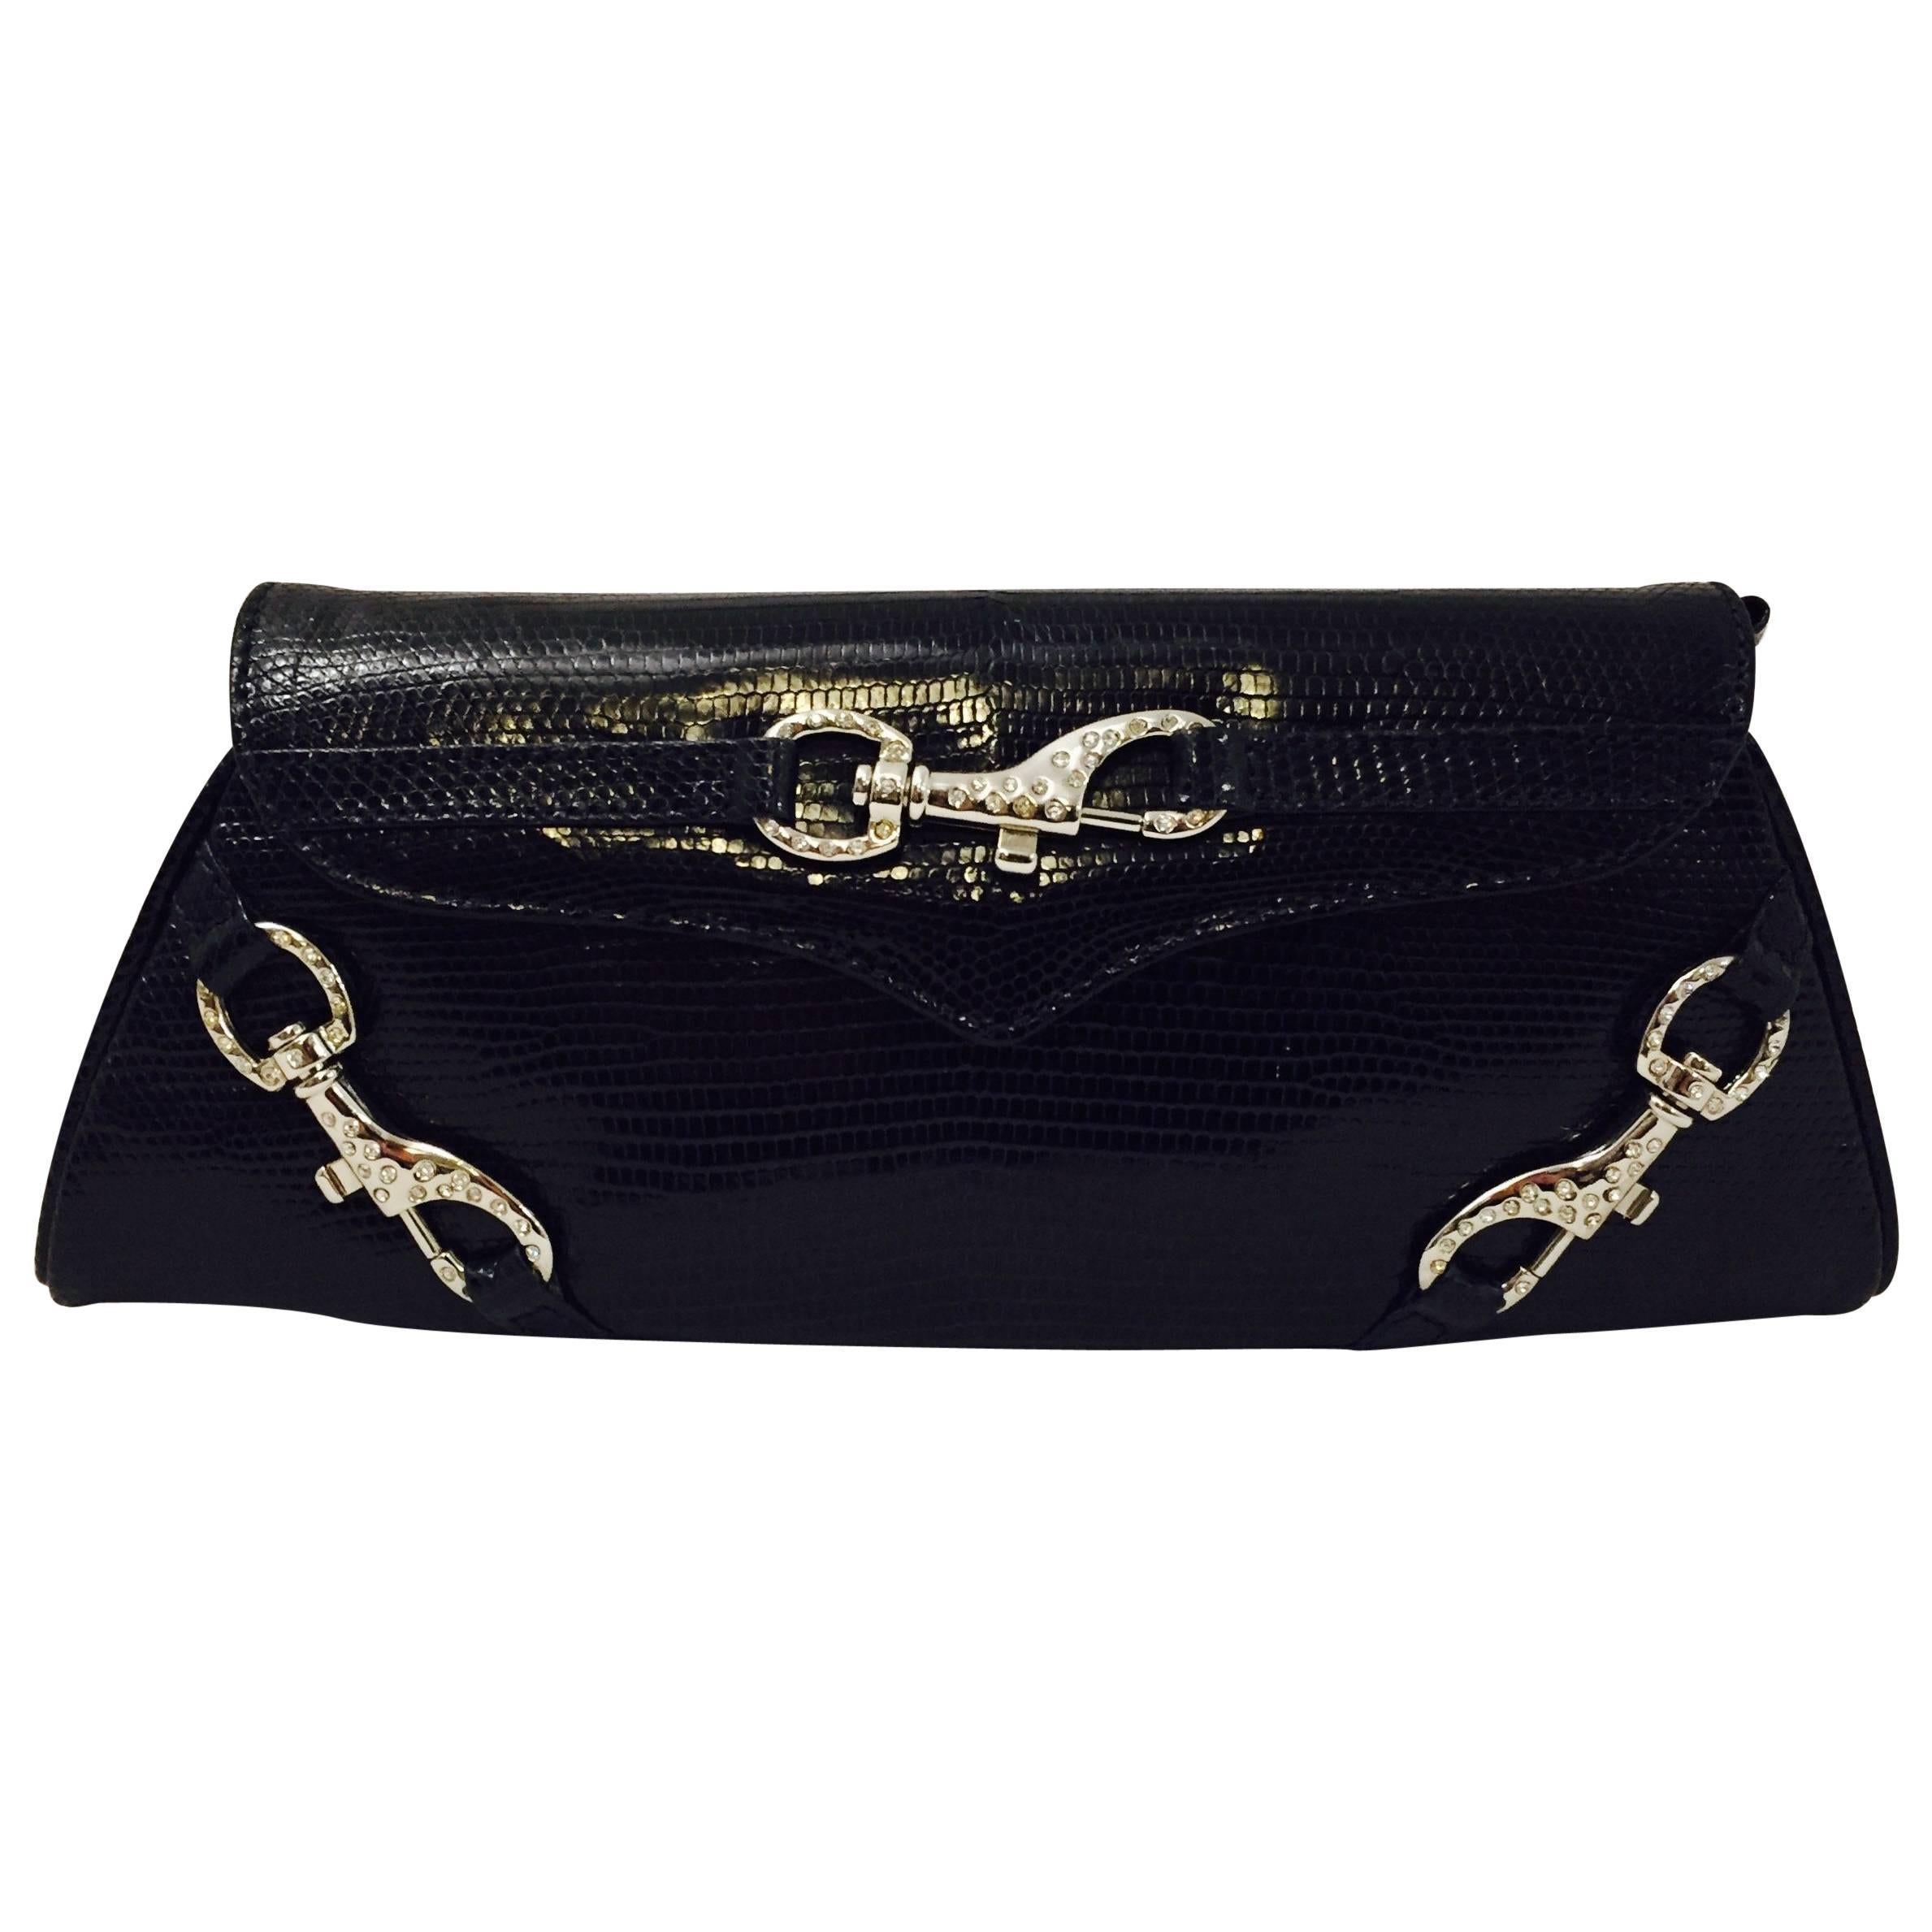 Luscious Lana Marks Blue Reptile Clutch Bag with 2 Optional Shoulder Straps